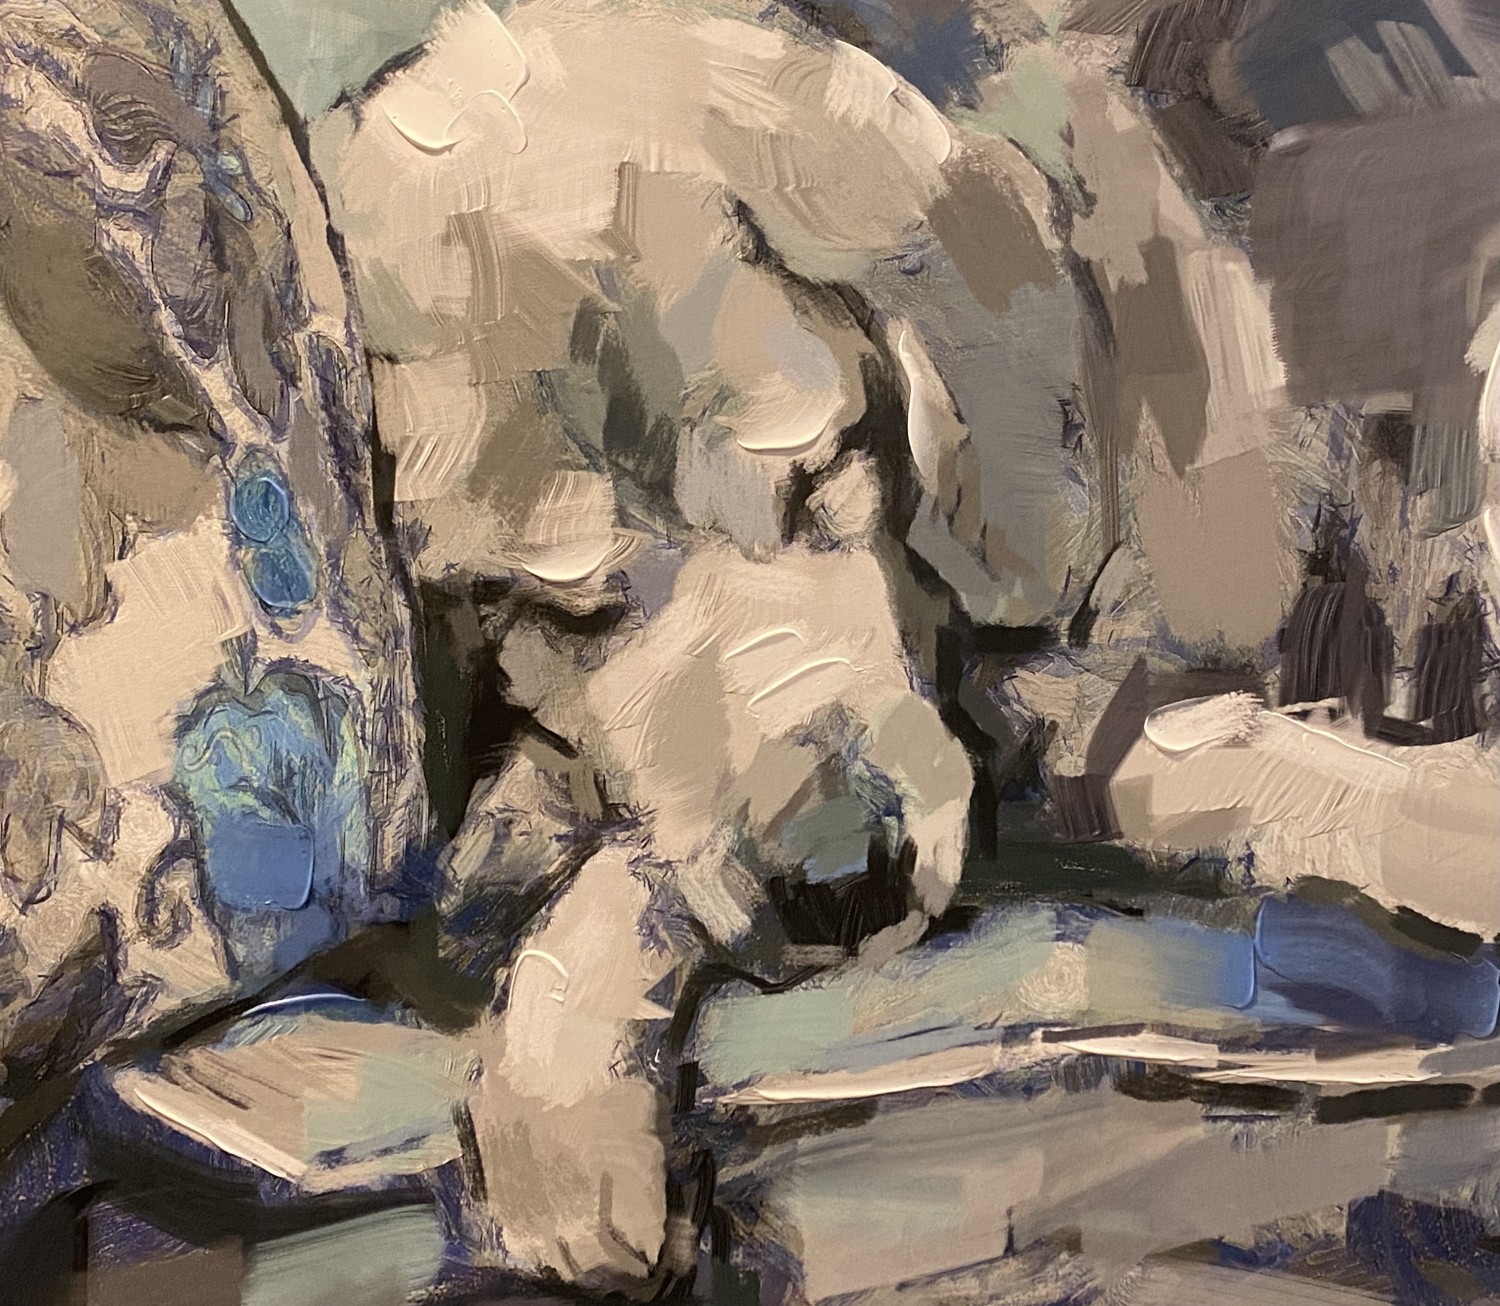 painting of dog